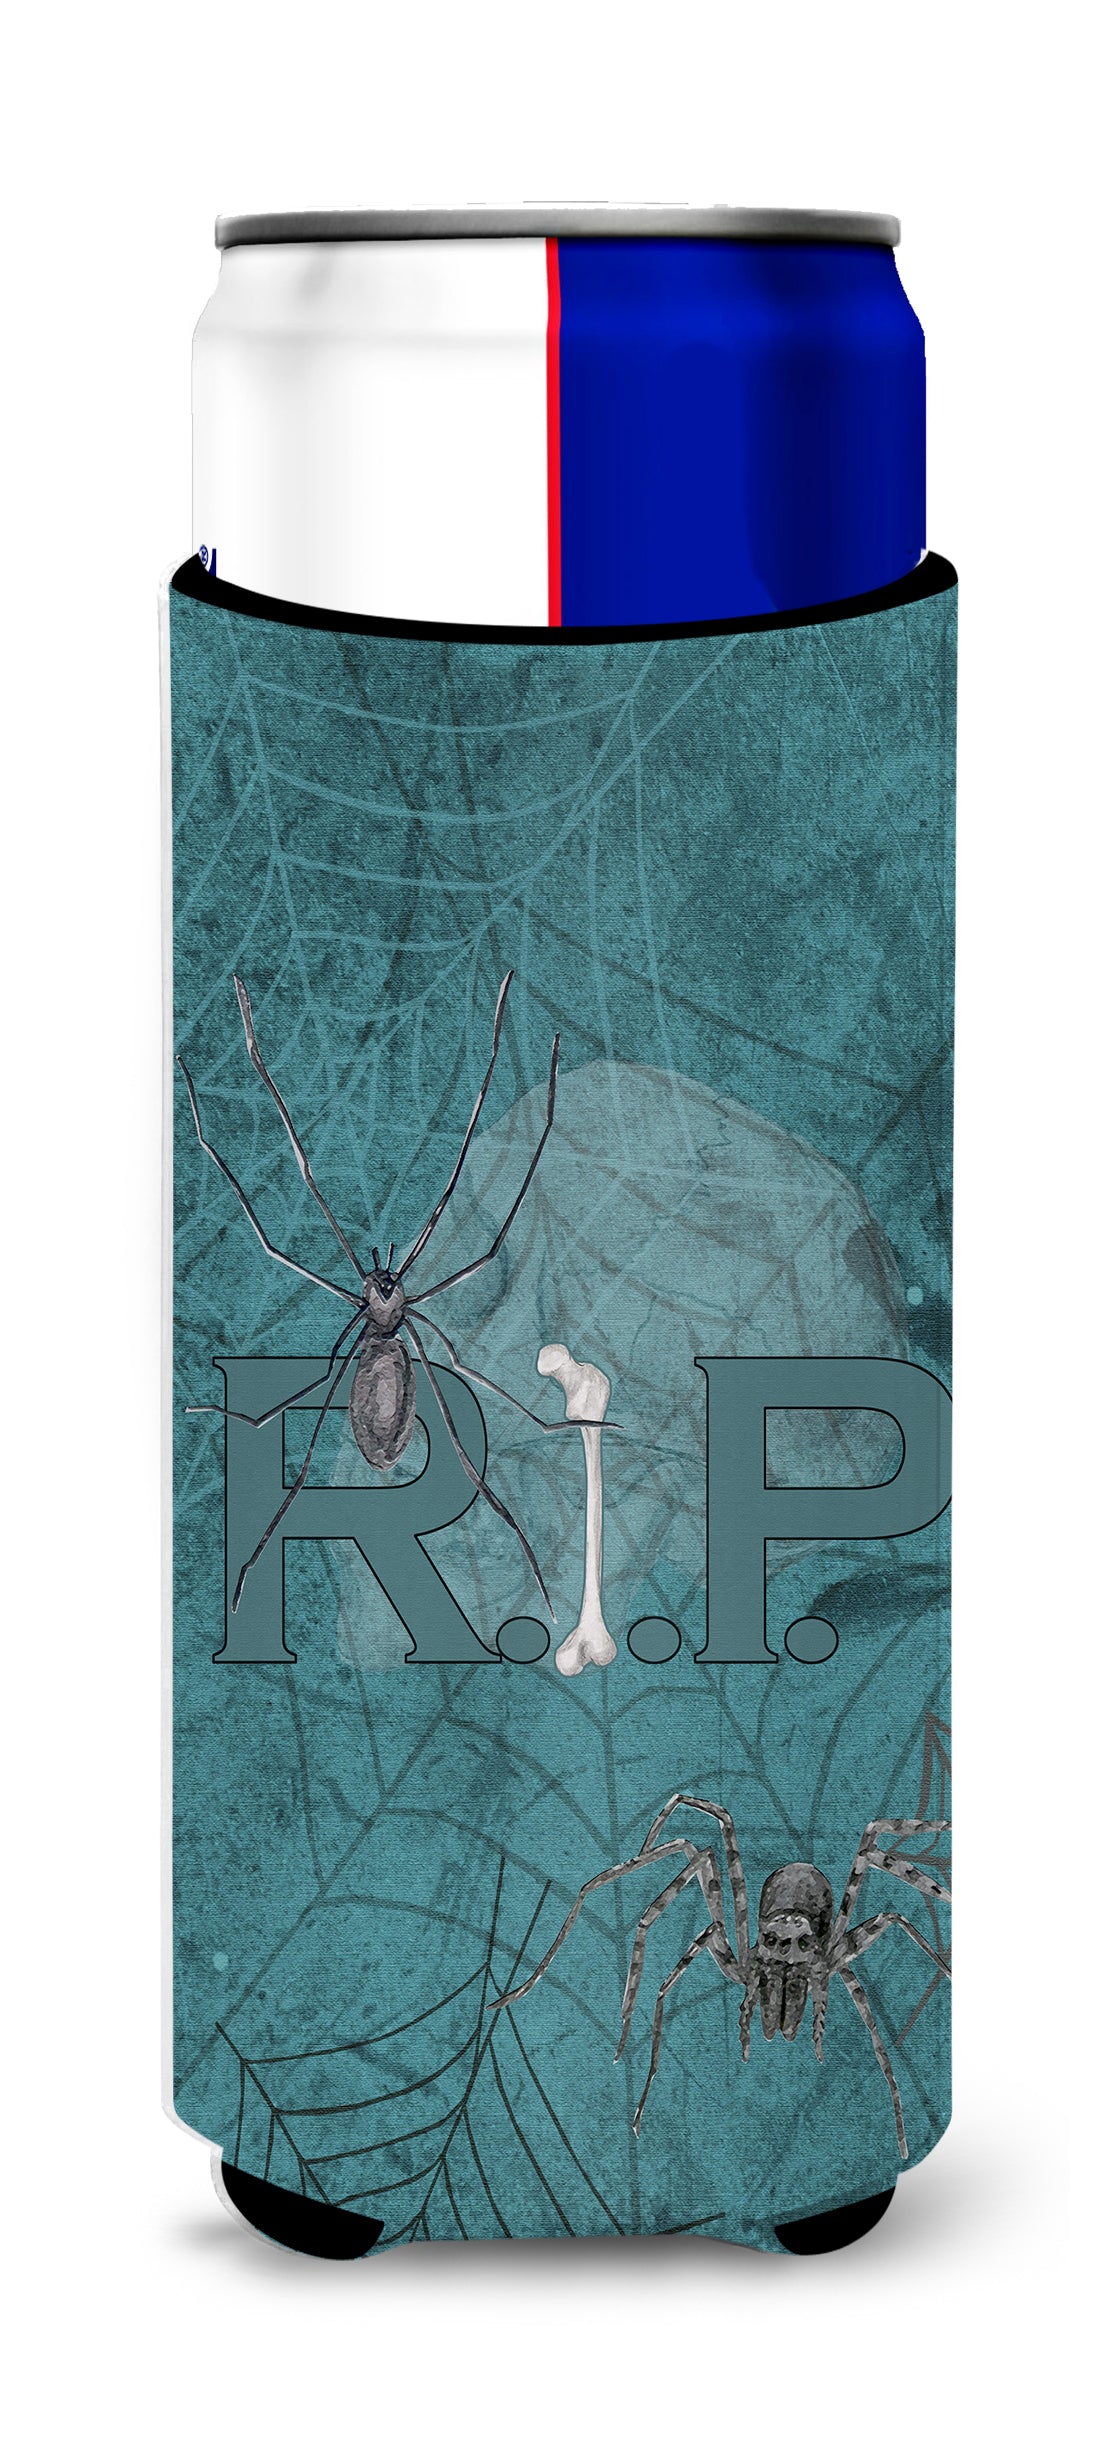 RIP Rest in Peace with spider web Halloween Ultra Beverage Insulators for slim cans SB3004MUK